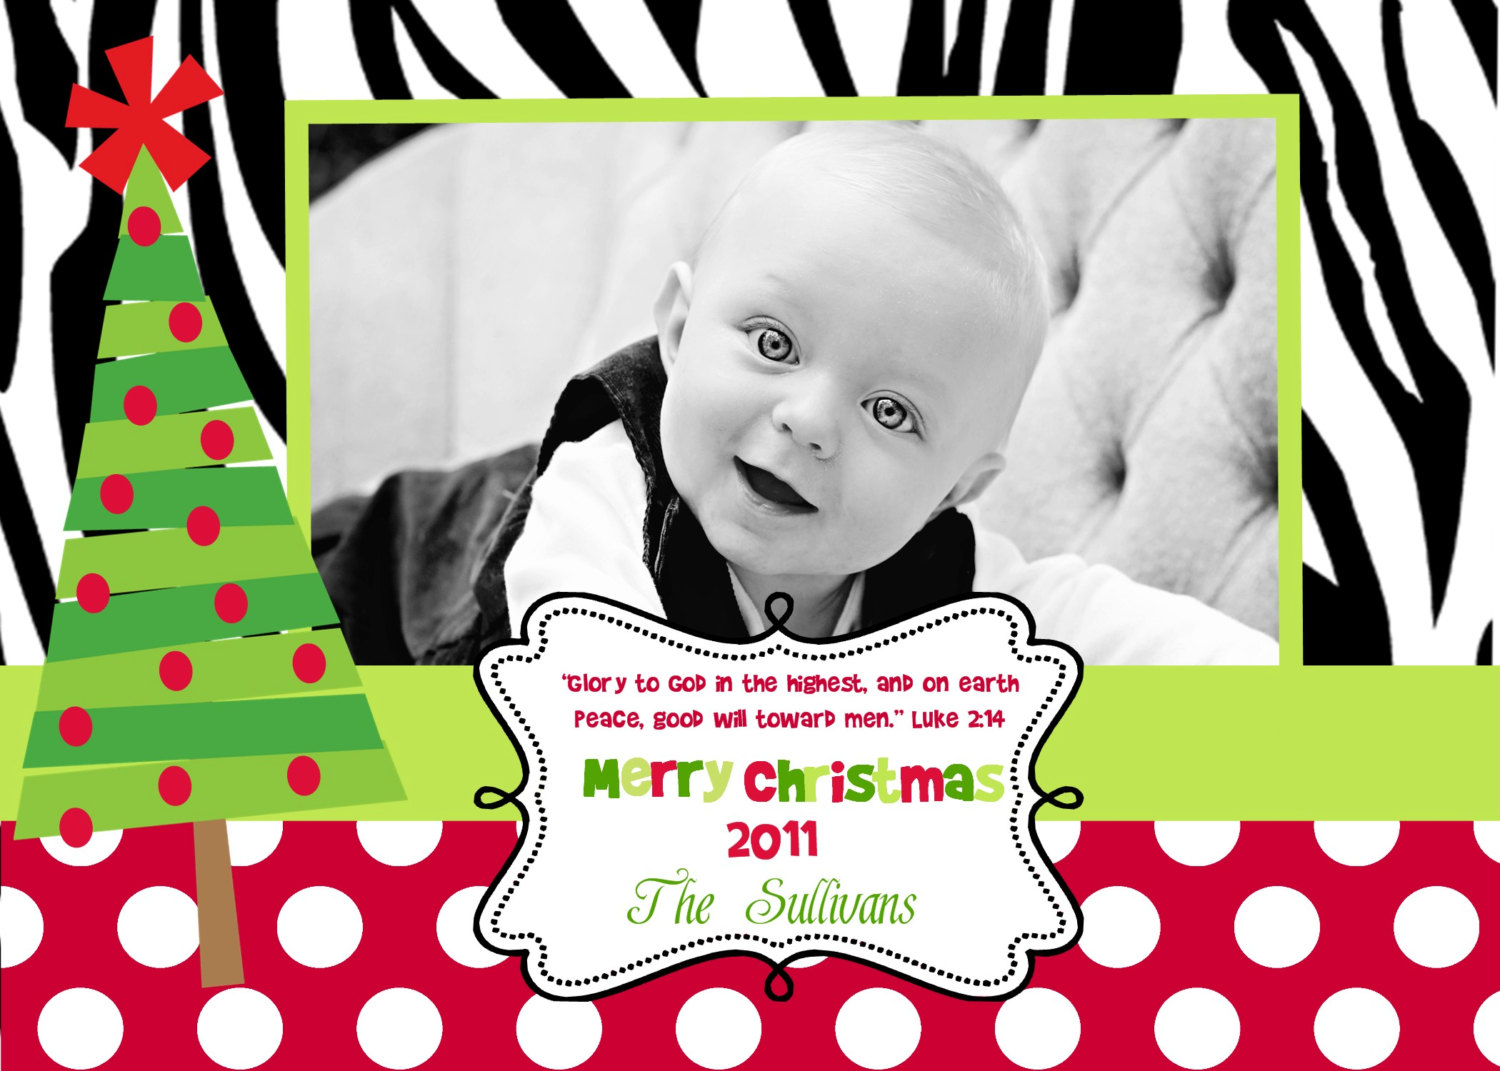 Personalized Christmas Cards Background Wallpaper Hivewallpaper